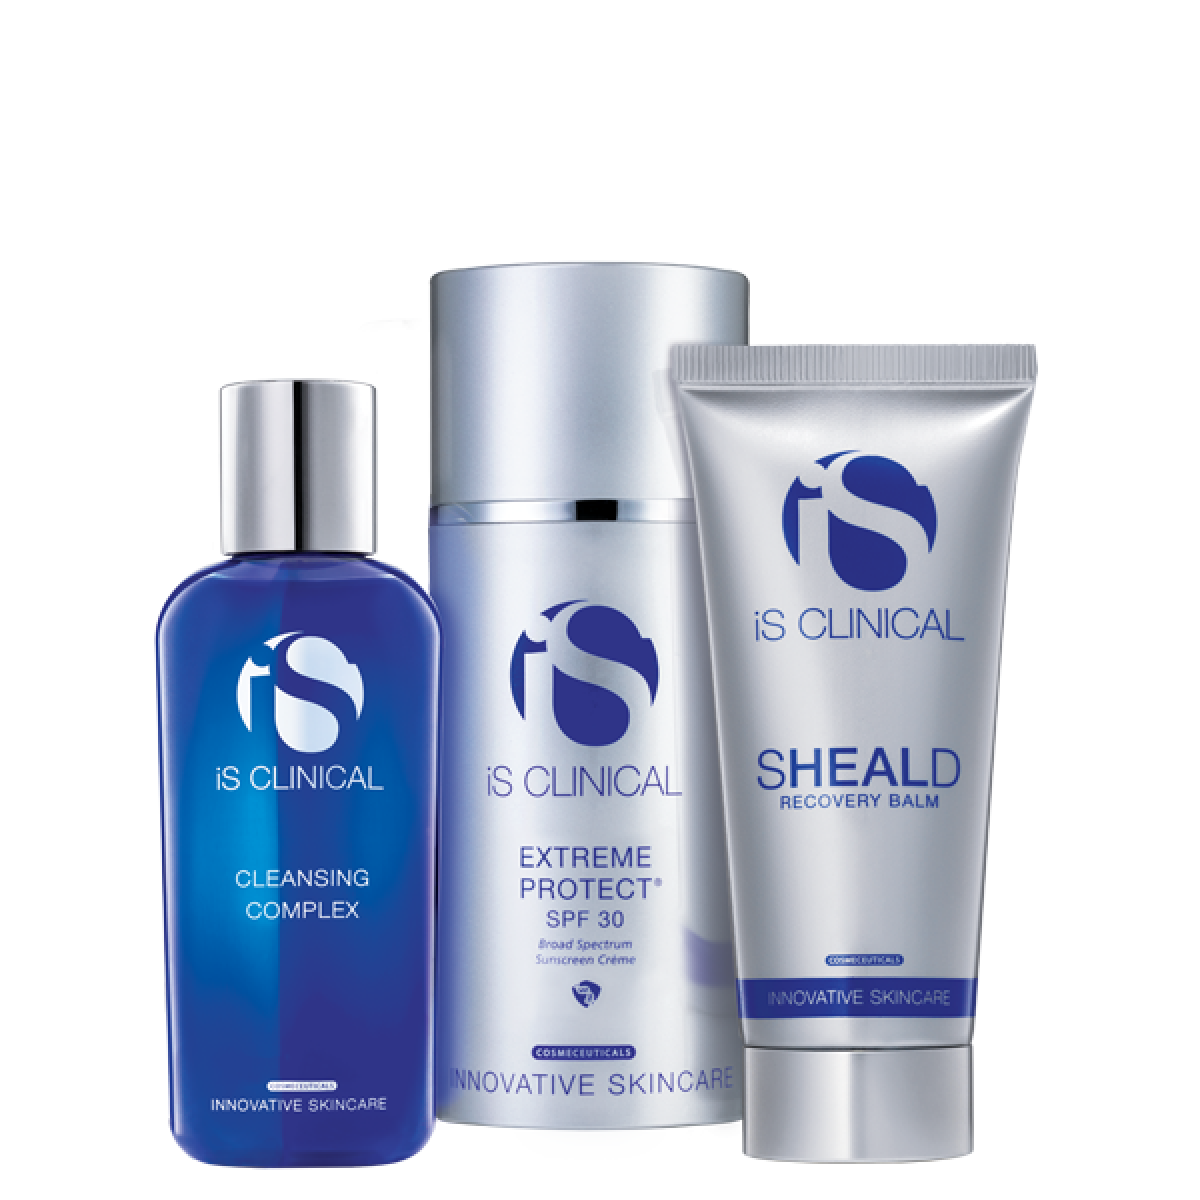 Sheald Recovery Balm. Is Clinical бальзам. Is Clinical sheald Recovery Balm. Is Clinical sheald Recovery Balm 15 мл. Ис клиникал